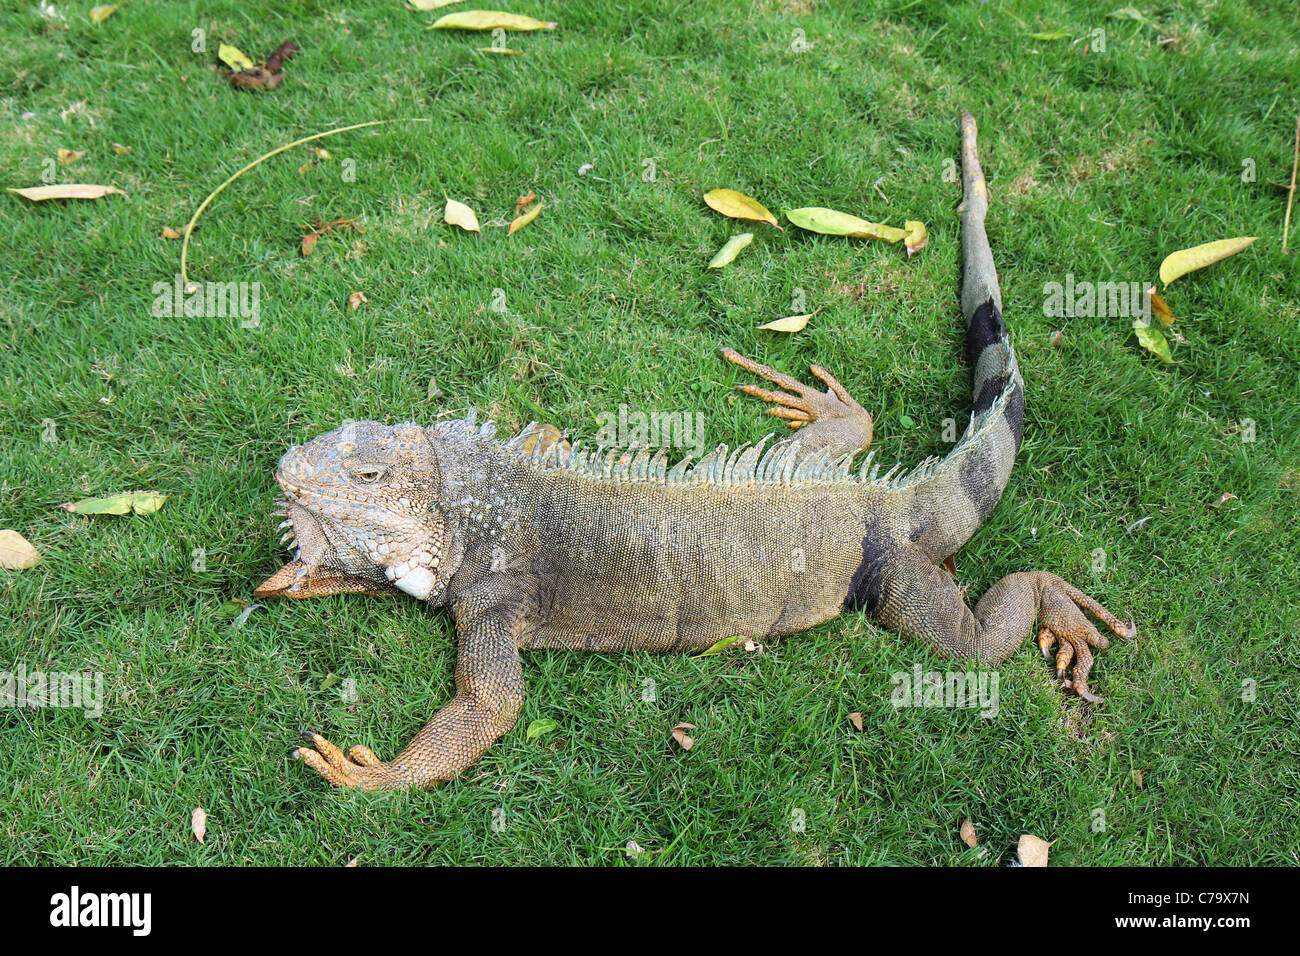 Land iguana on the grass in Guayaquil, Ecuador Stock Photo